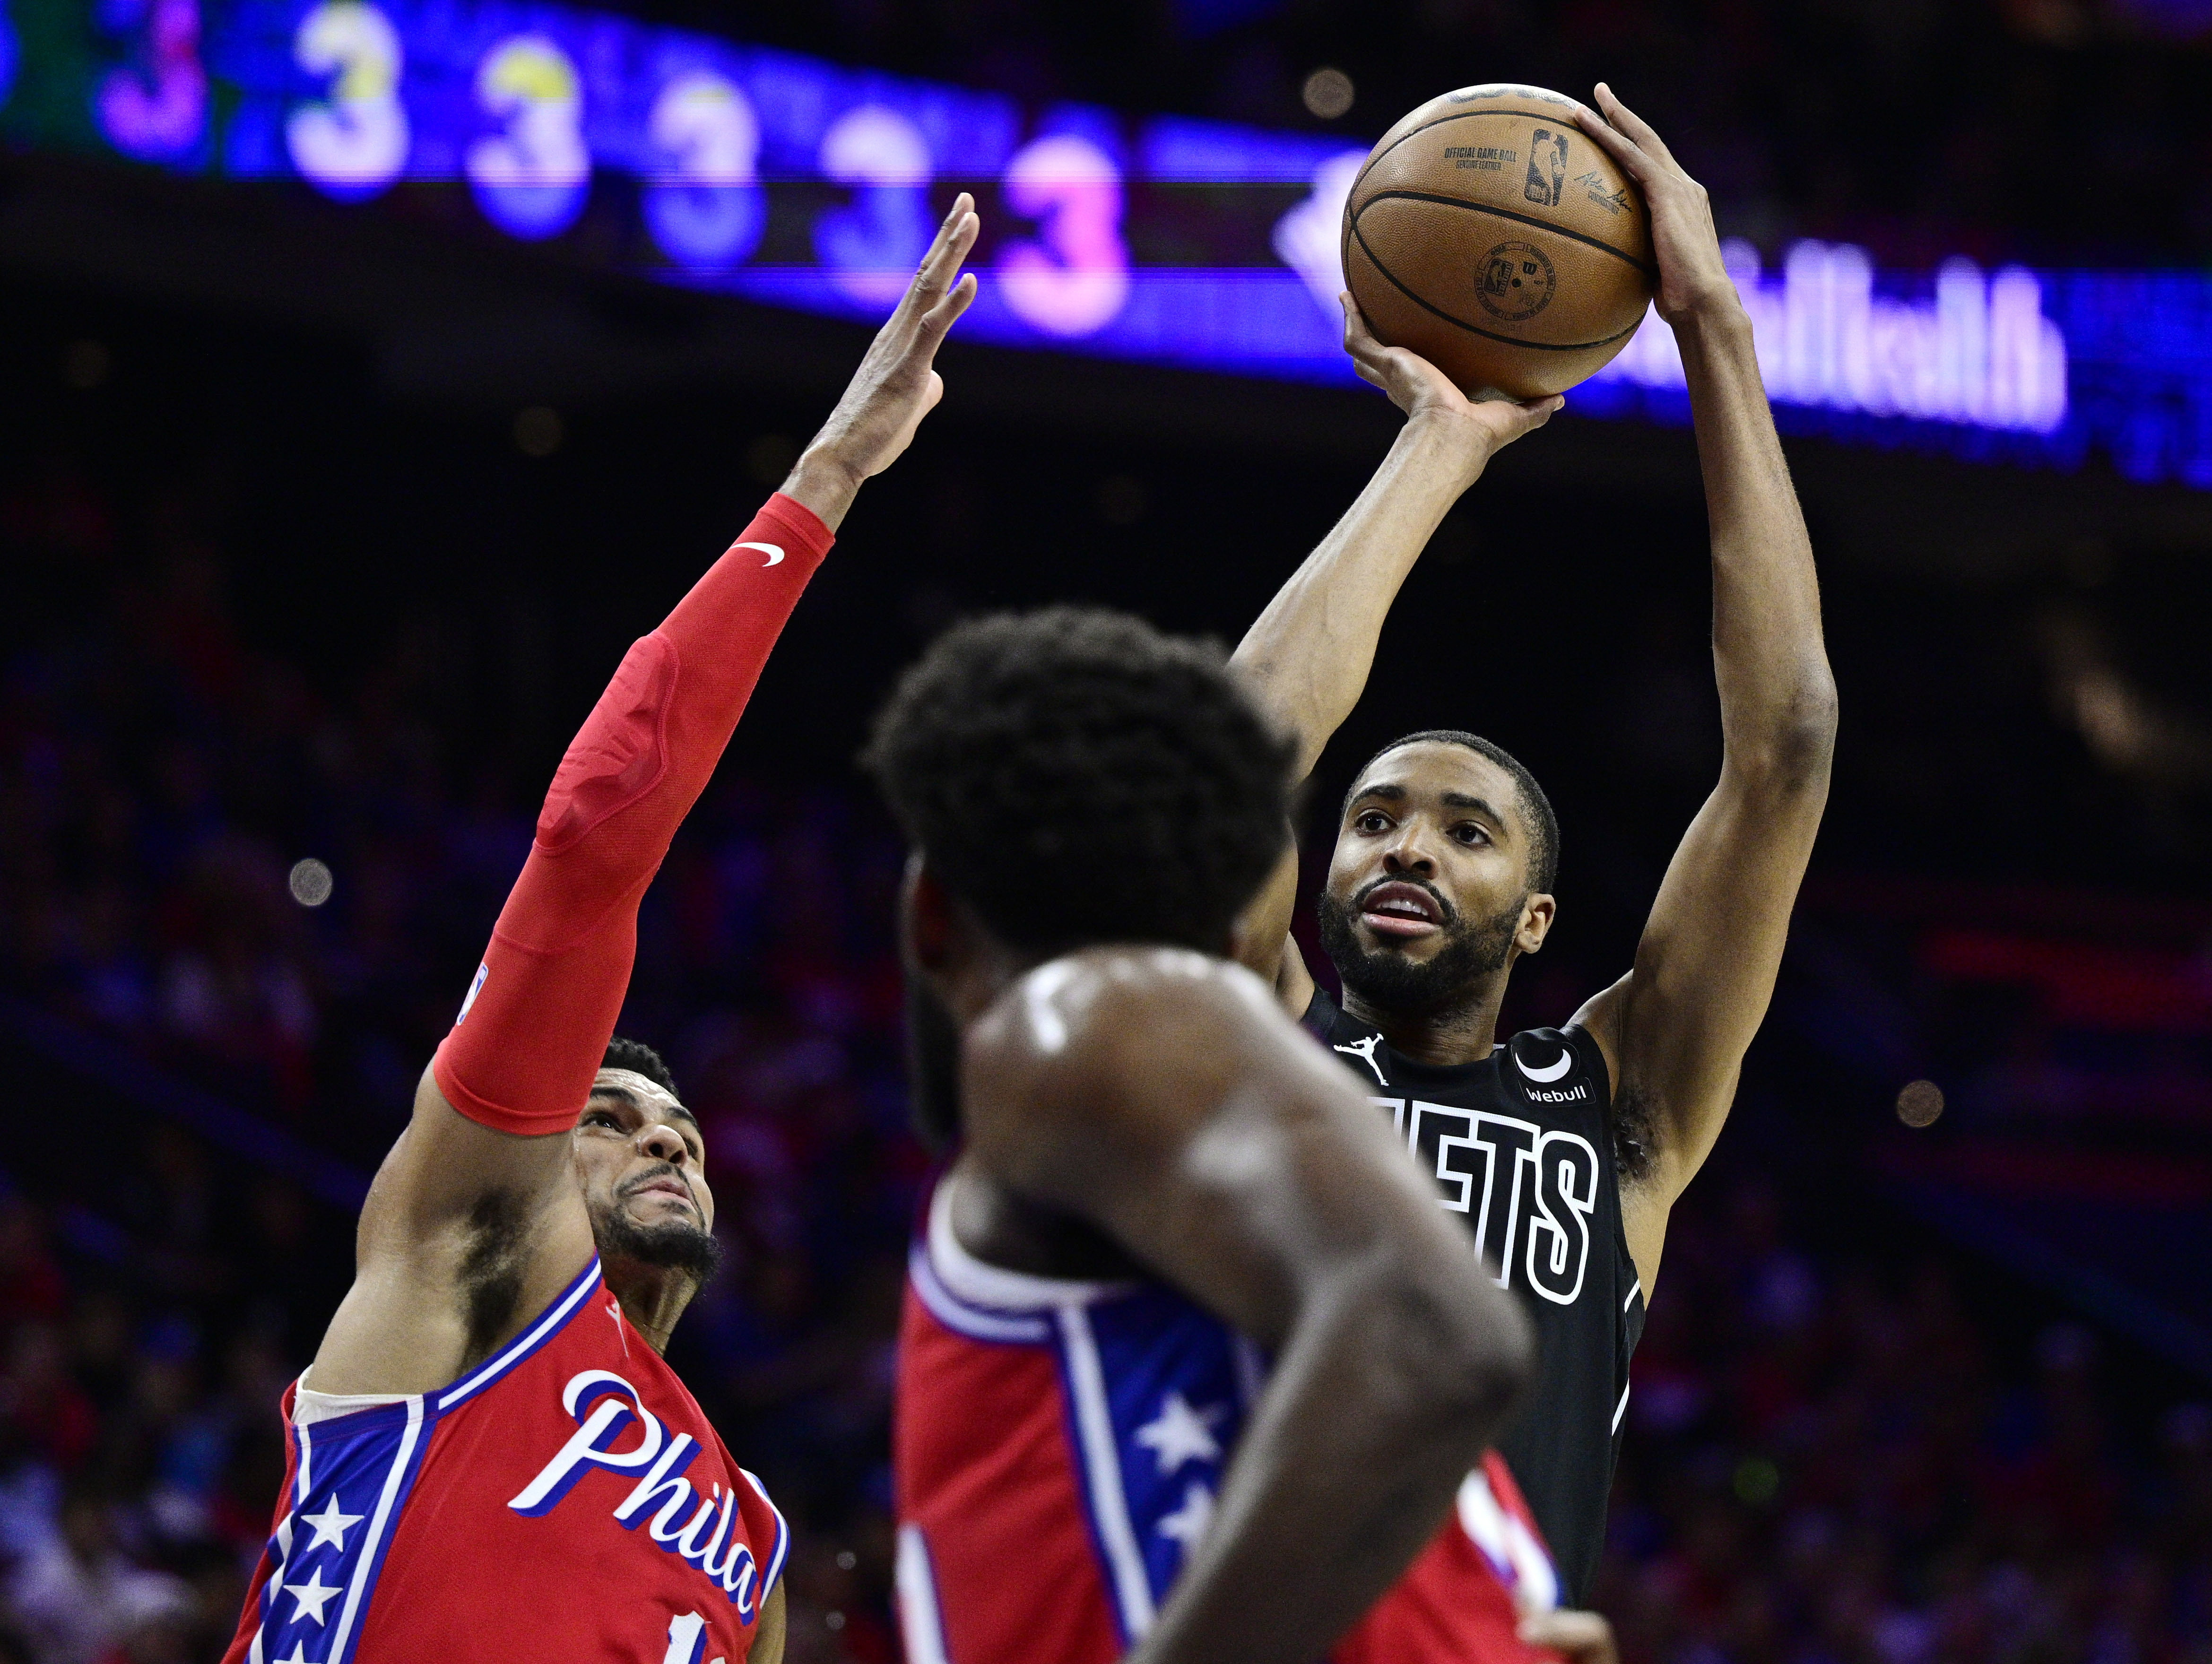 Harden scores 23 as 76ers cruise past Nets 121-101 in Game 1